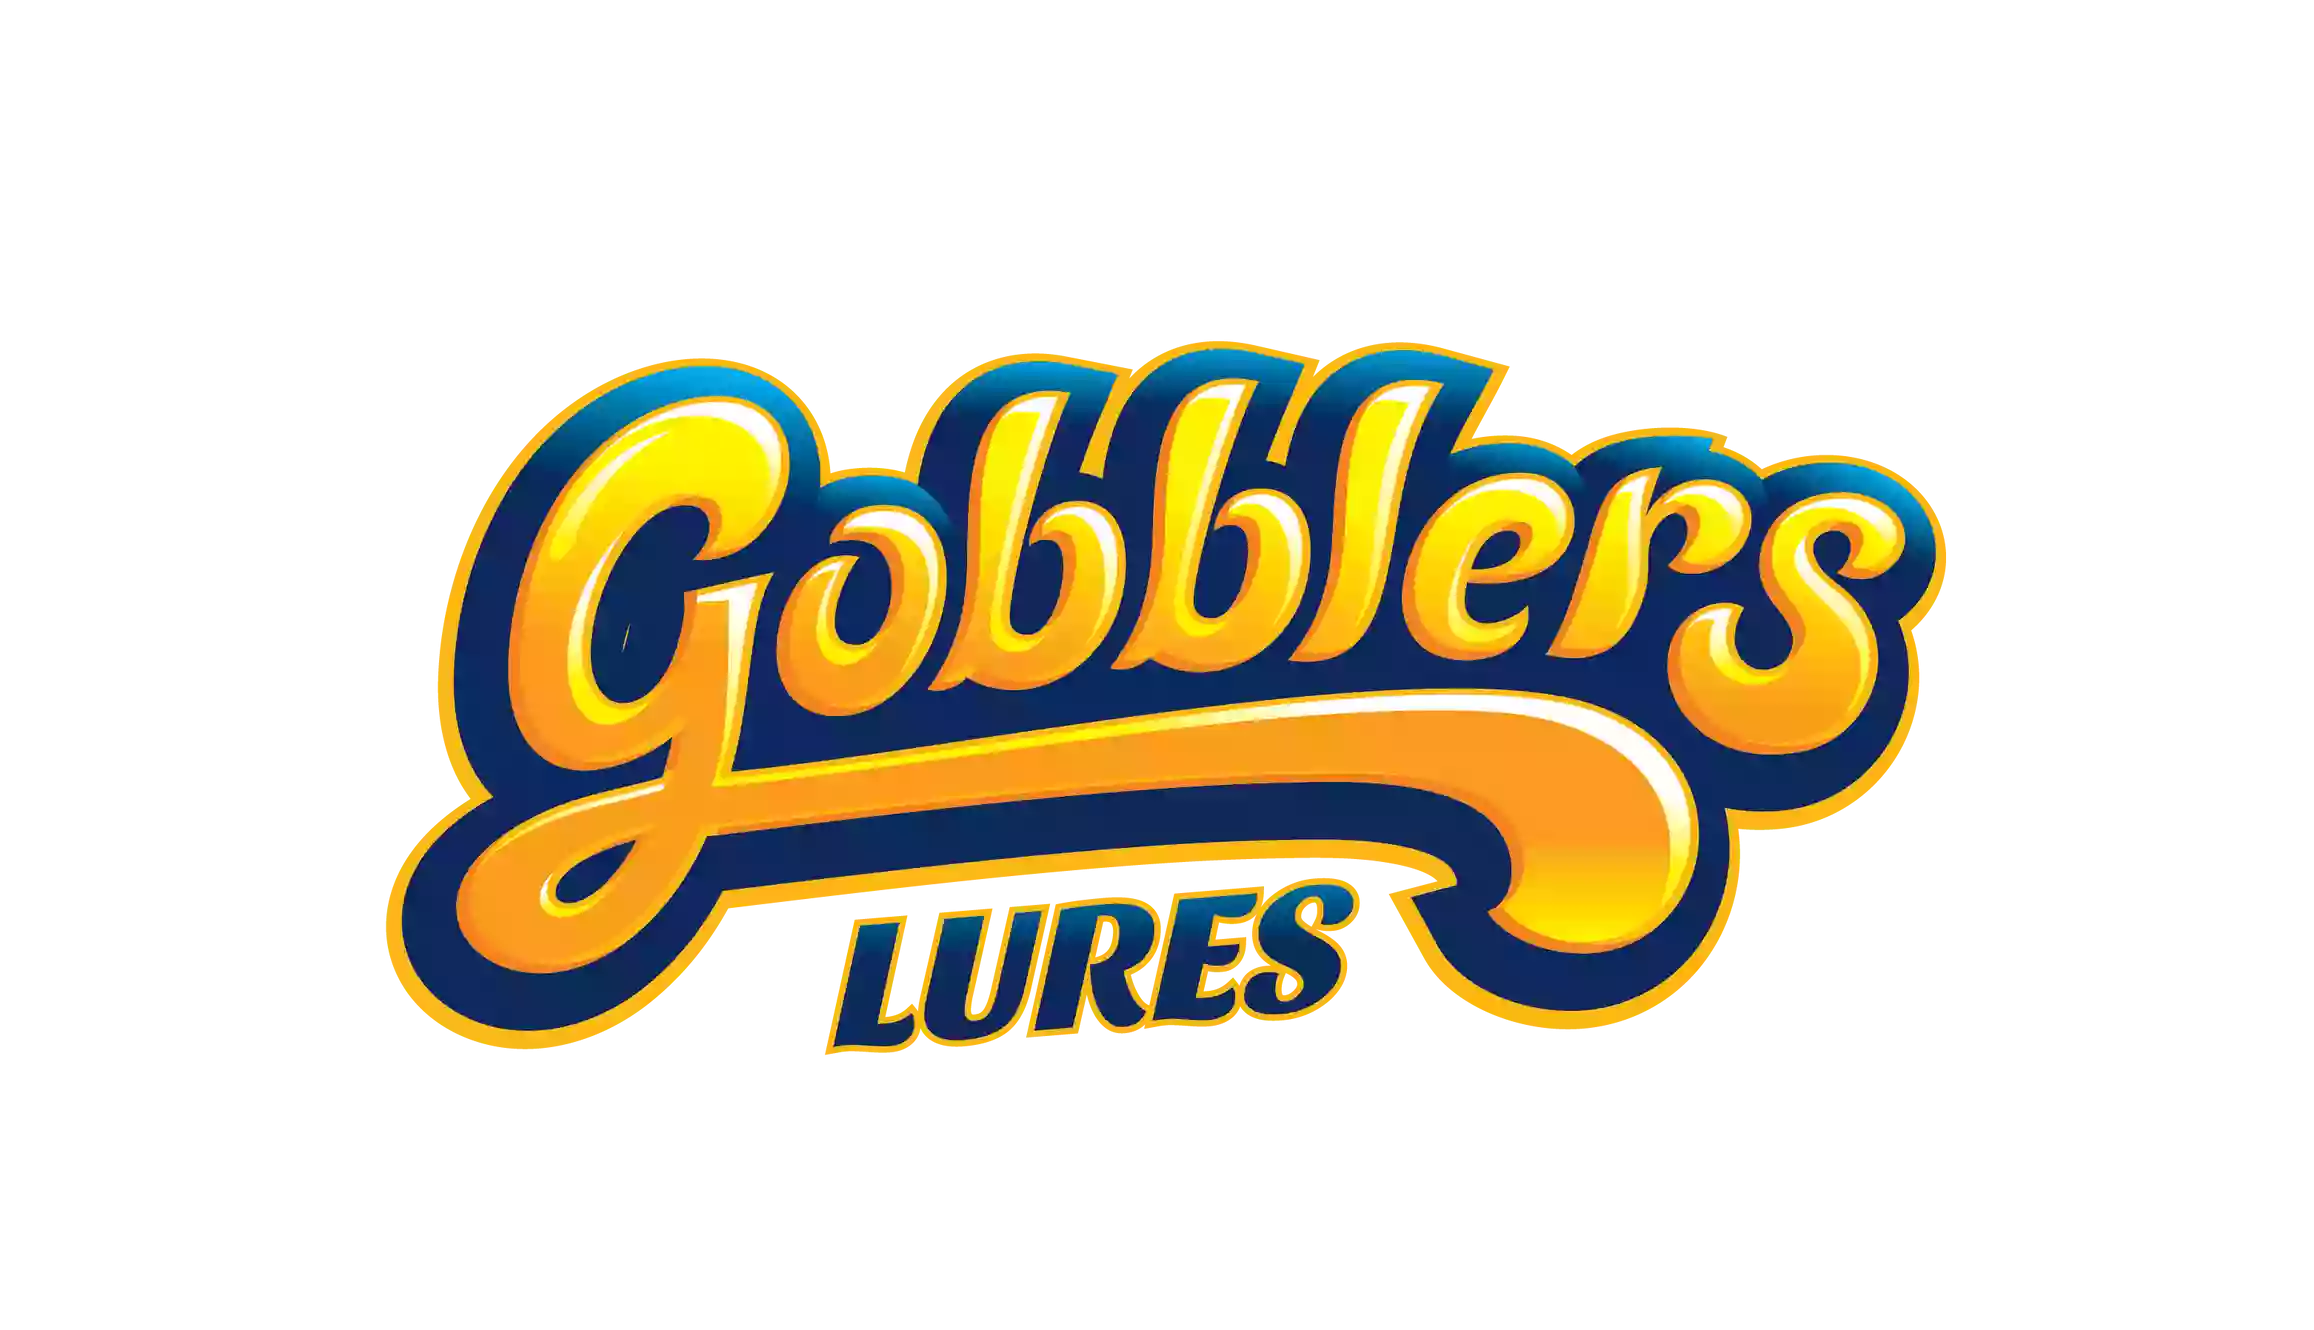 Gobblers Lures